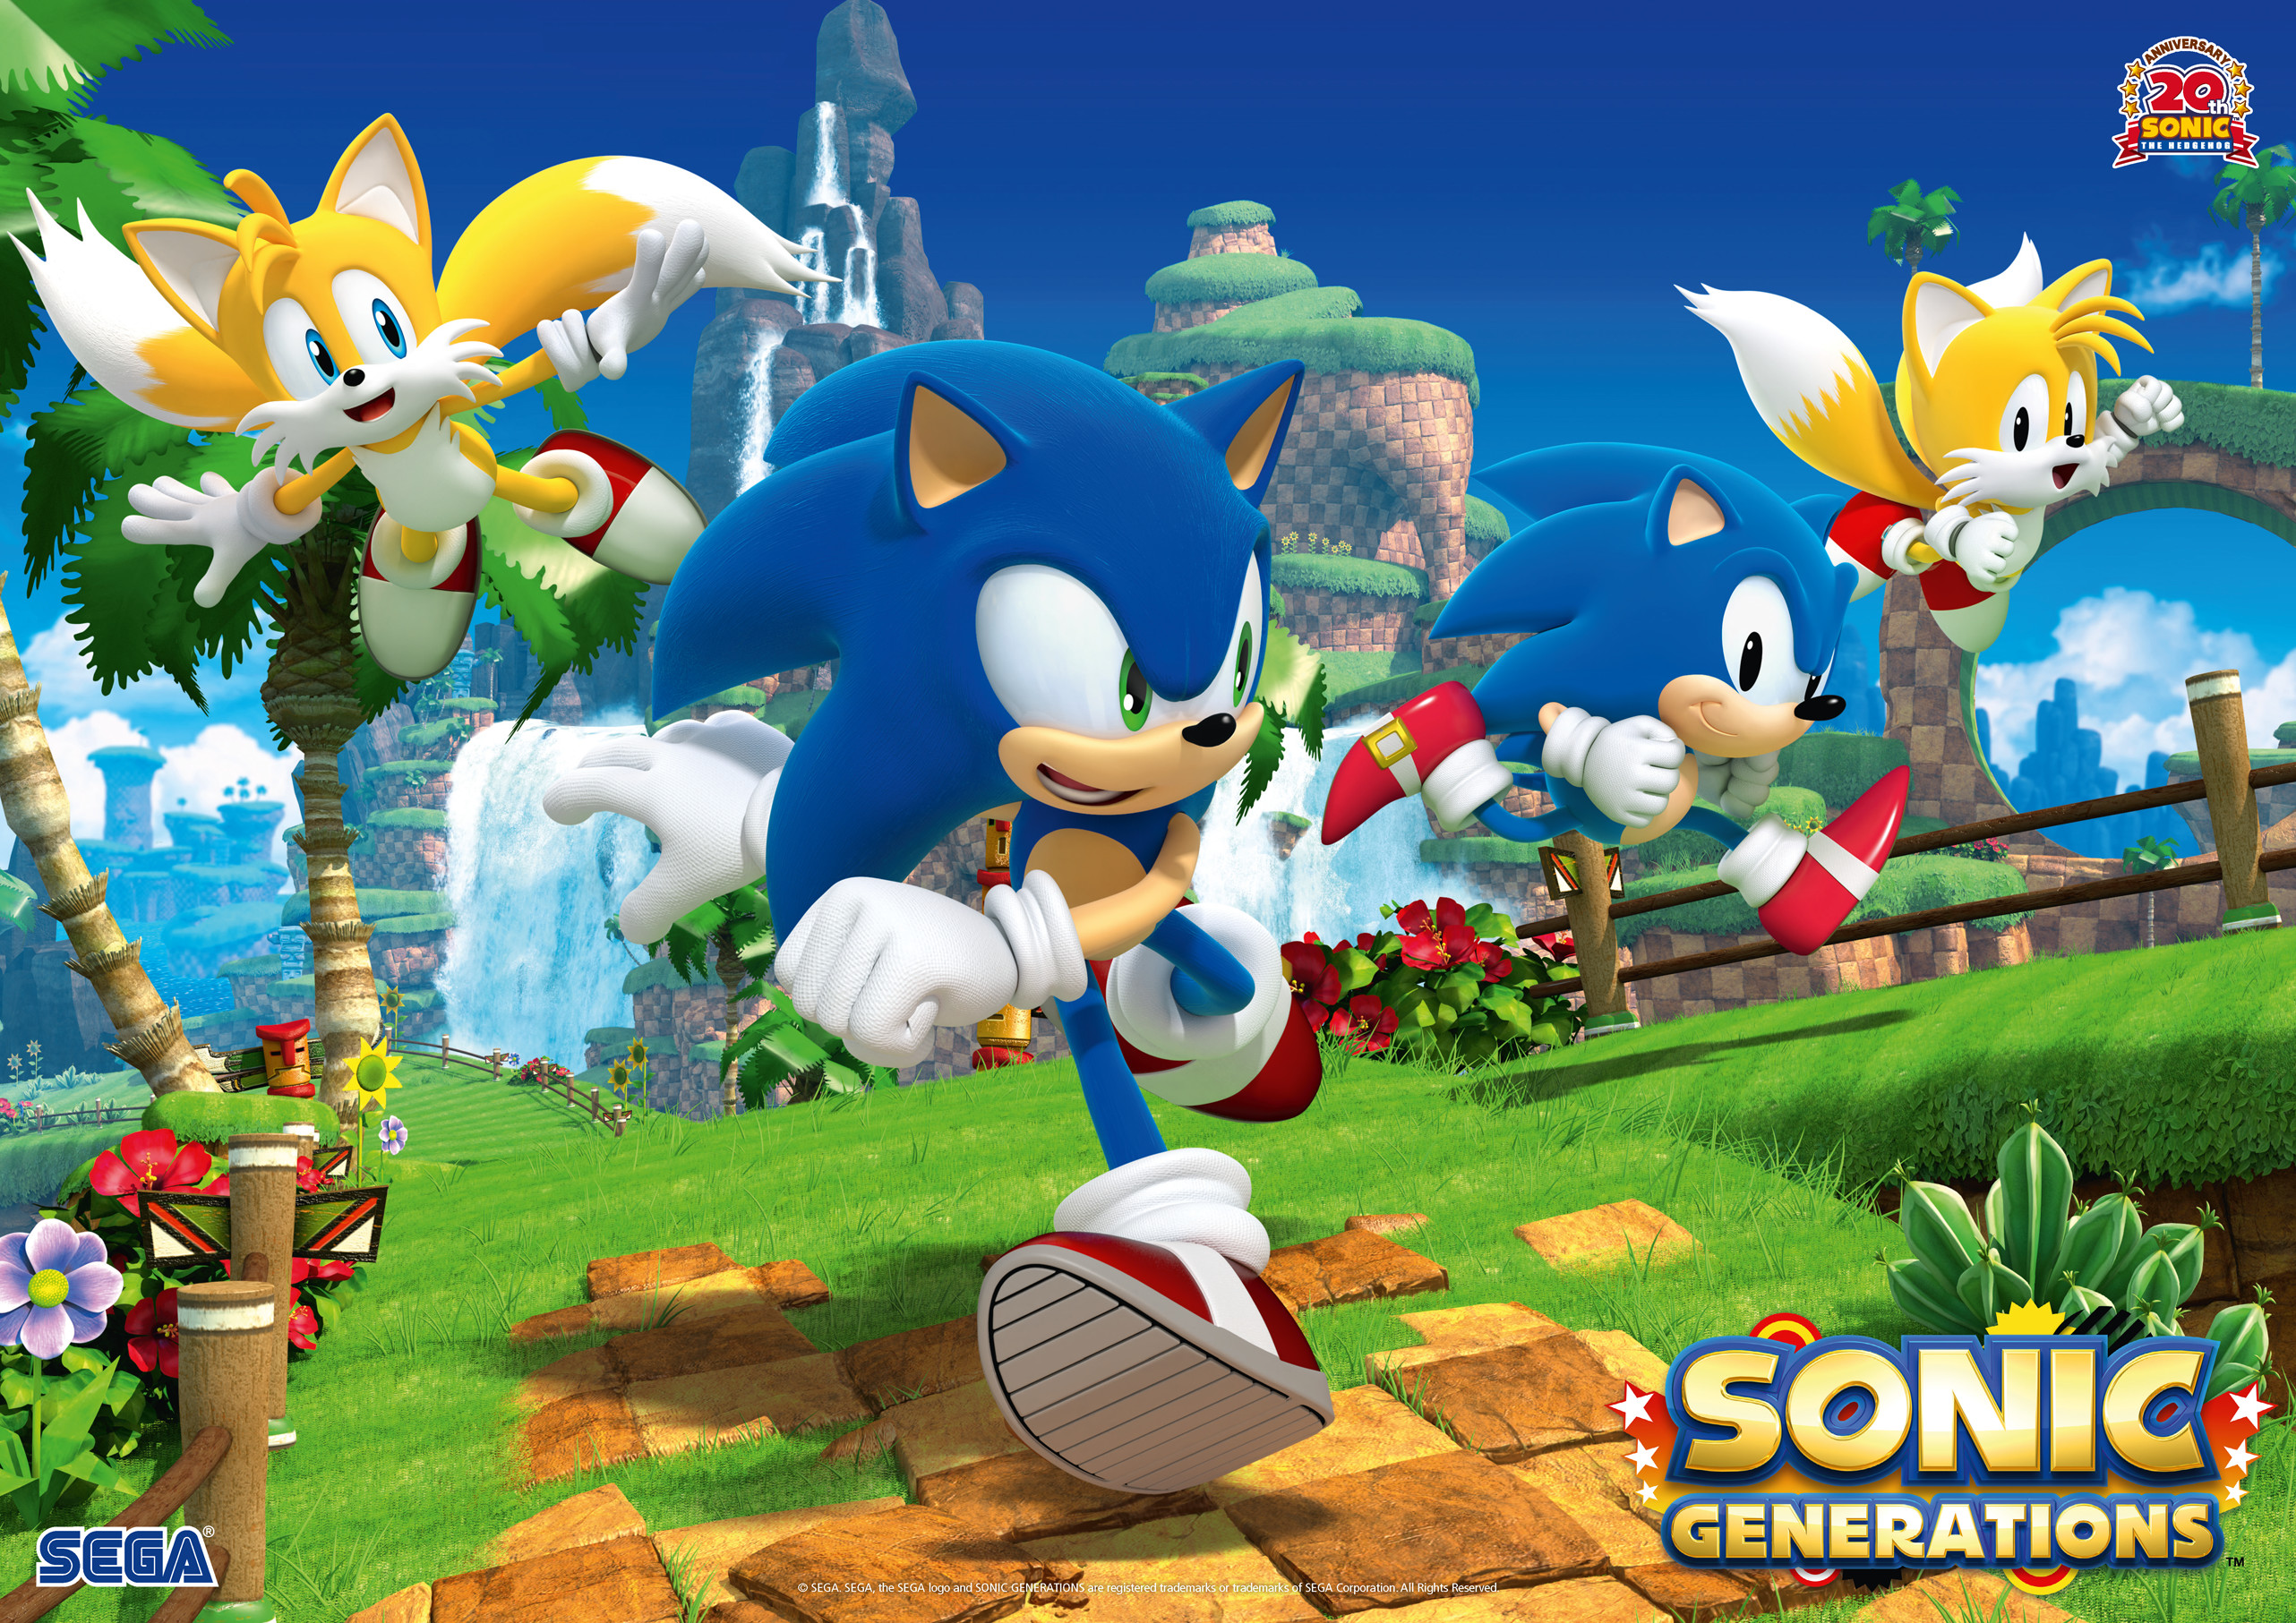 Sonic Sonic The Hedgehog Sonic Generations Tails Character Sega Video Game Art PC Gaming Video Game  2564x1813